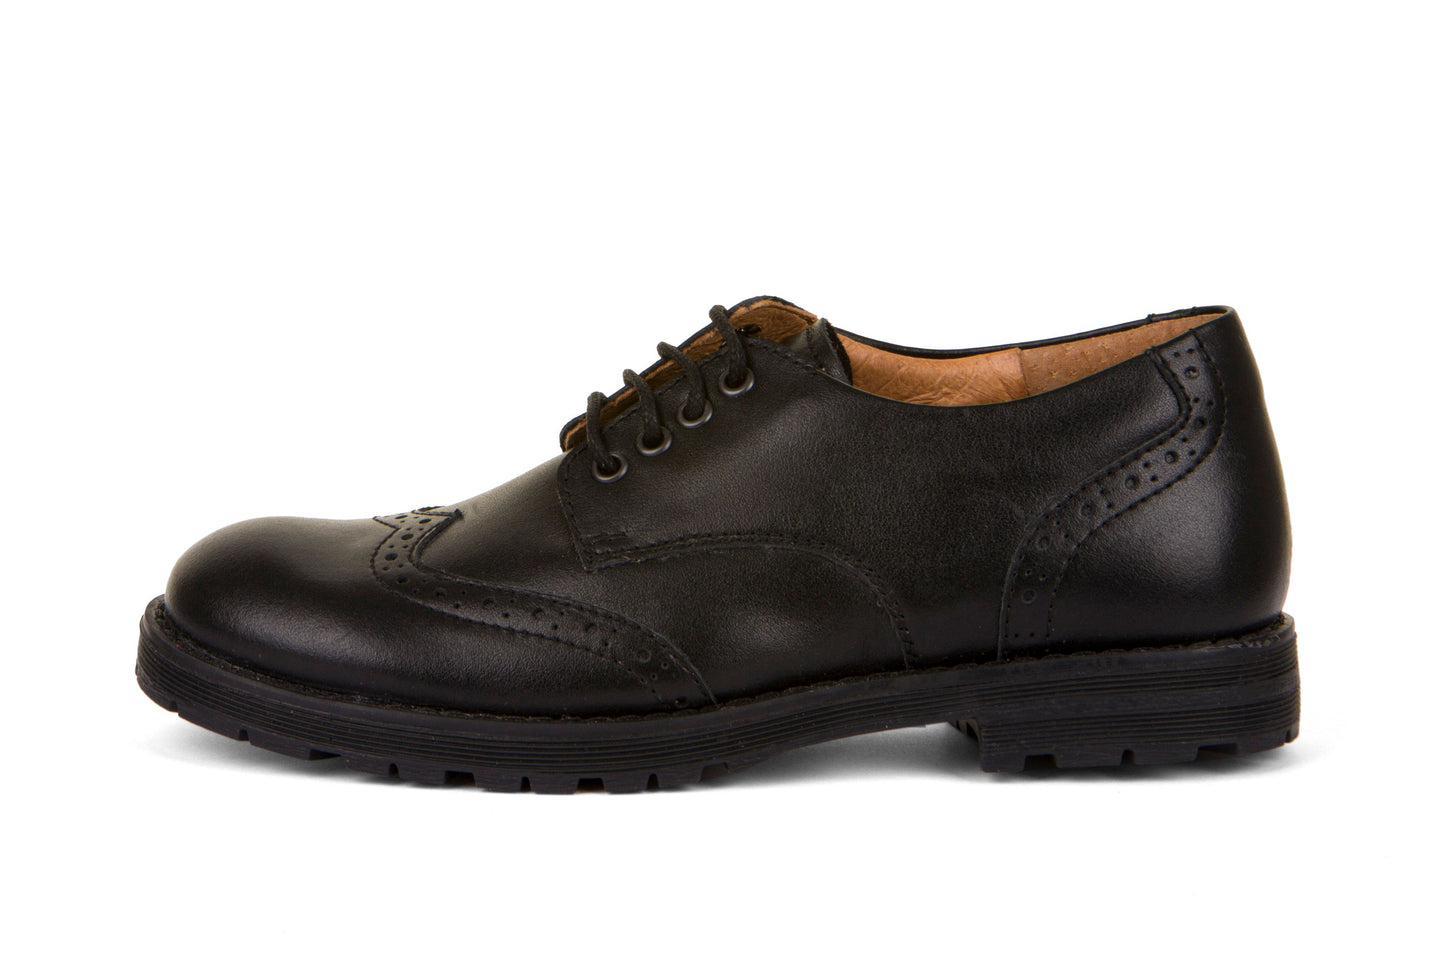 Froddo Black leather Brogue lace up School Shoes